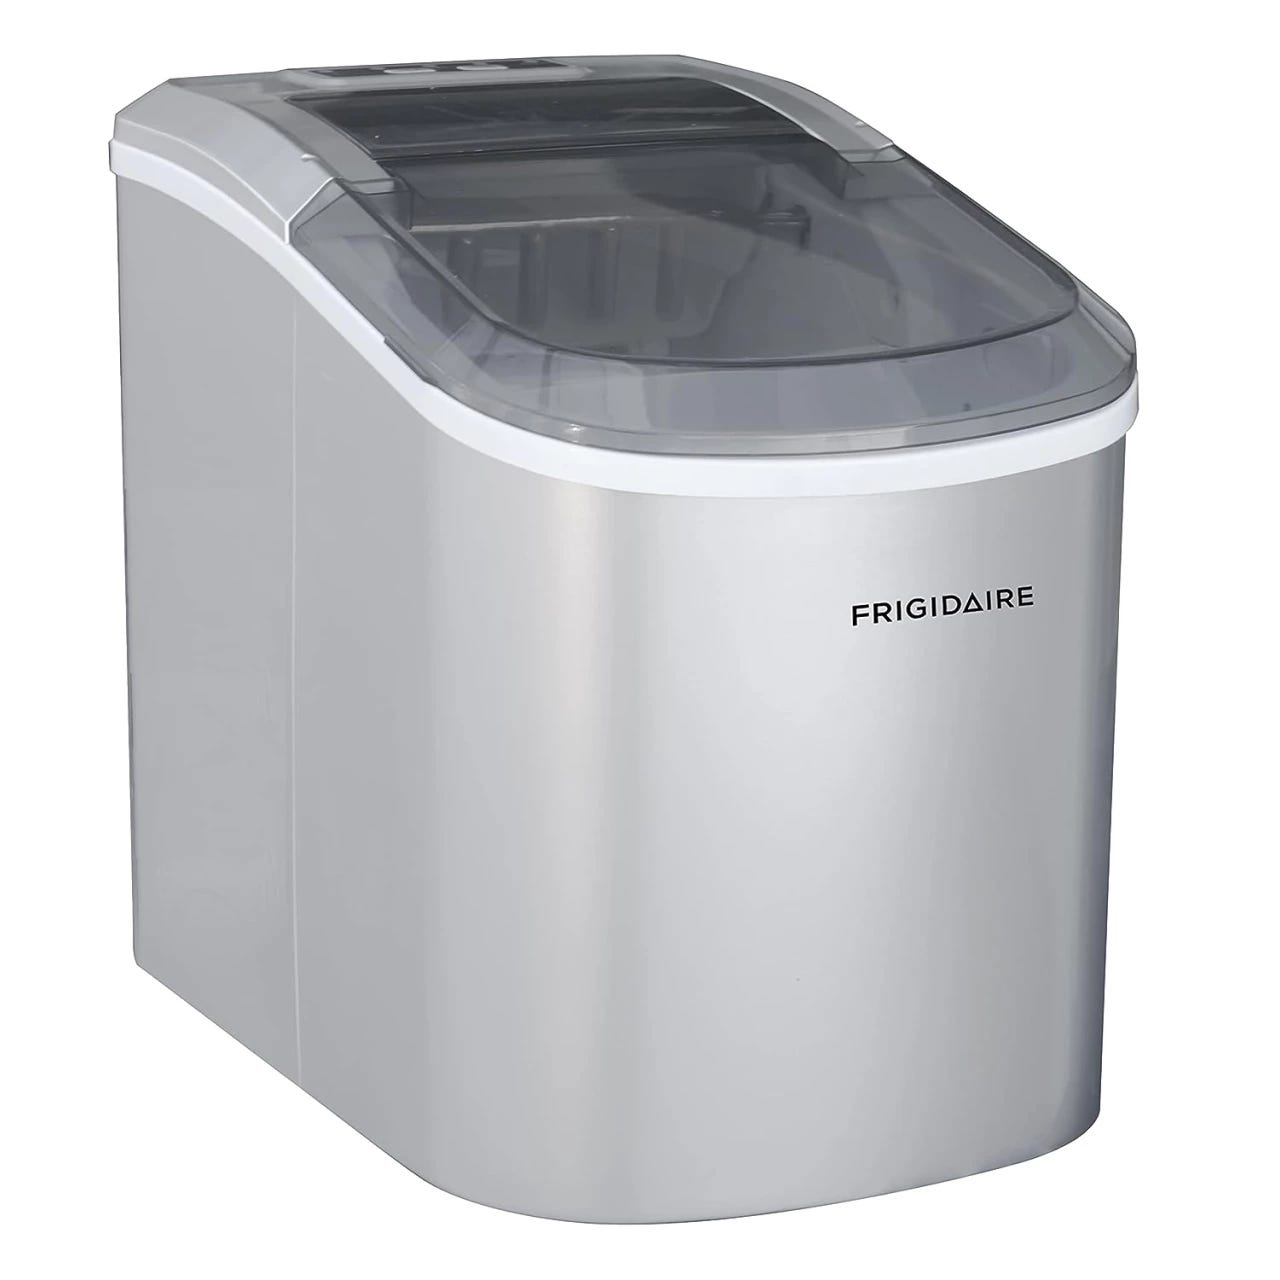 frigidaire ice maker 26-lb. Stainless Steel Compact